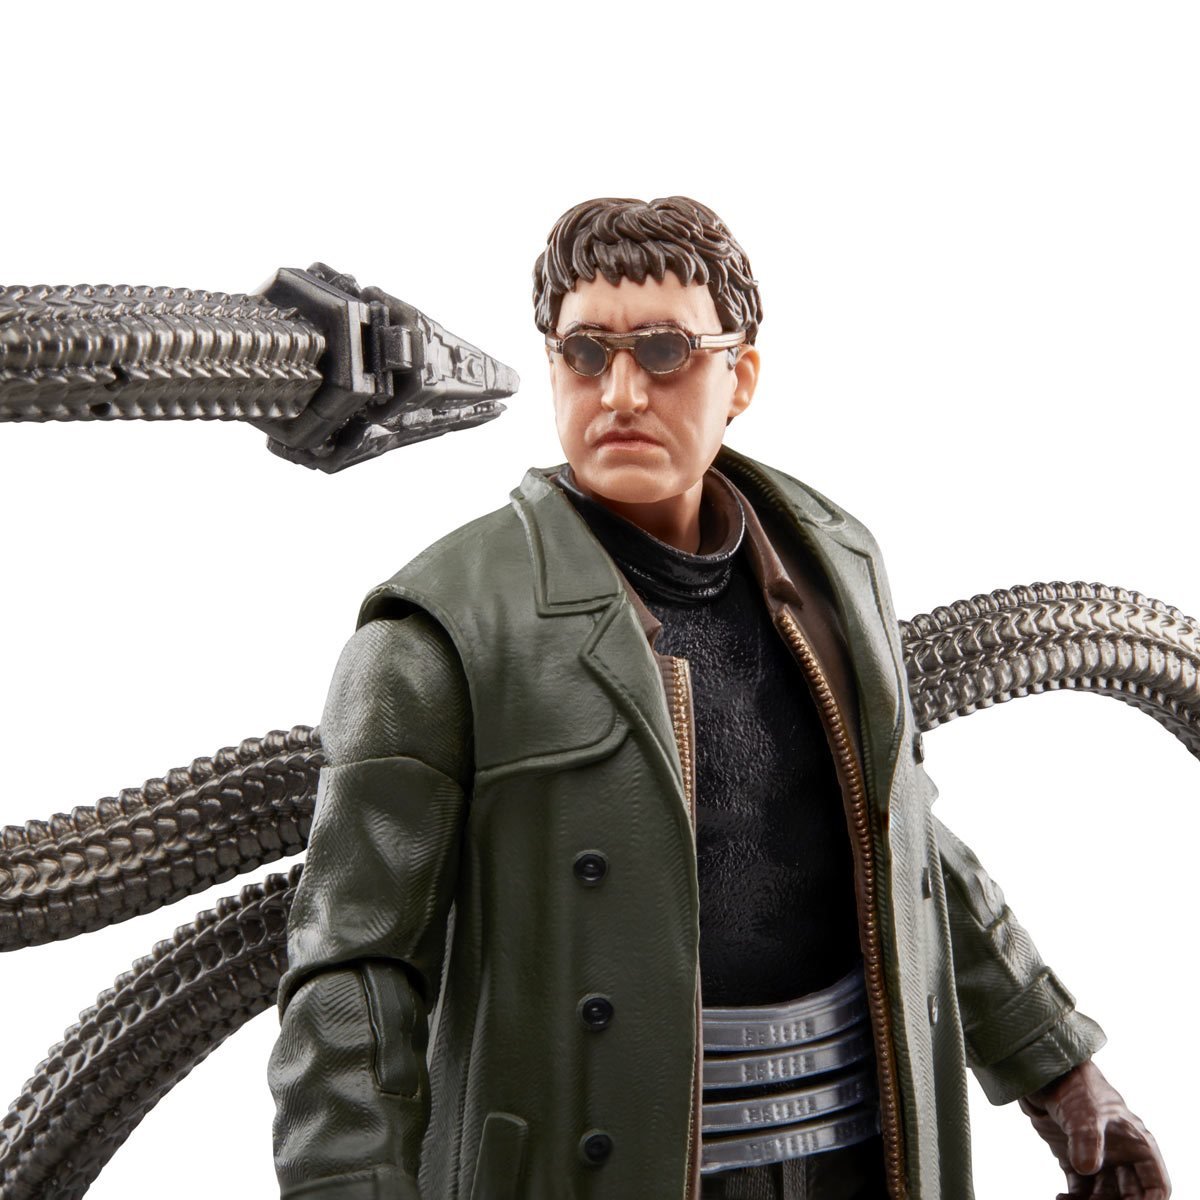 Doc Ock is Back with New Hot Toys Spider-Man: No Way Home Figure